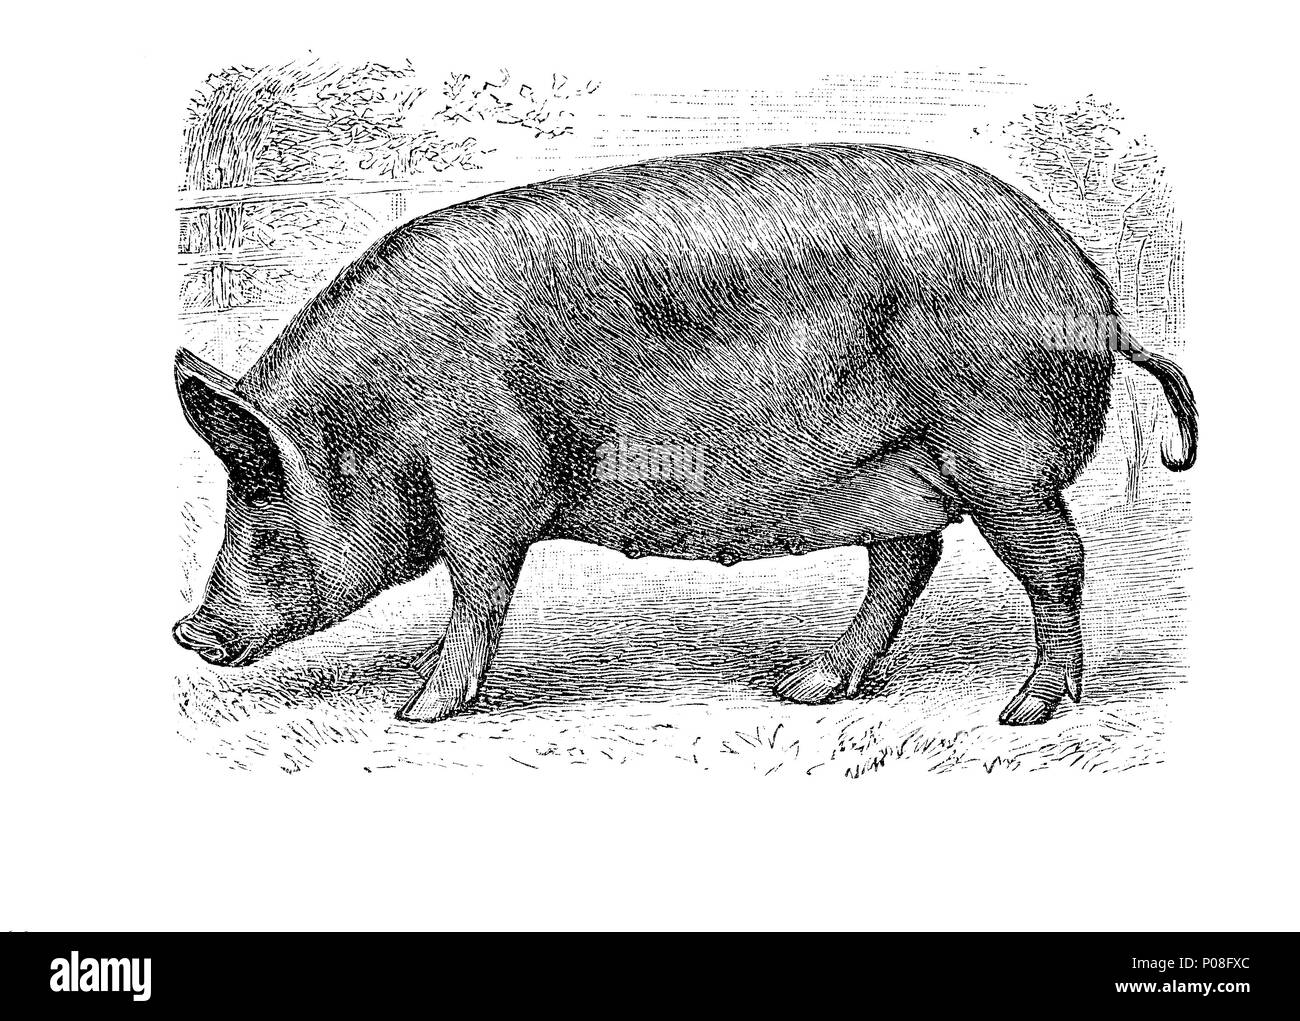 Tamworthschwein, Sus scrofa domesticus, a pig breed from England, digital improved reproduction of an original print from the year 1881 Stock Photo